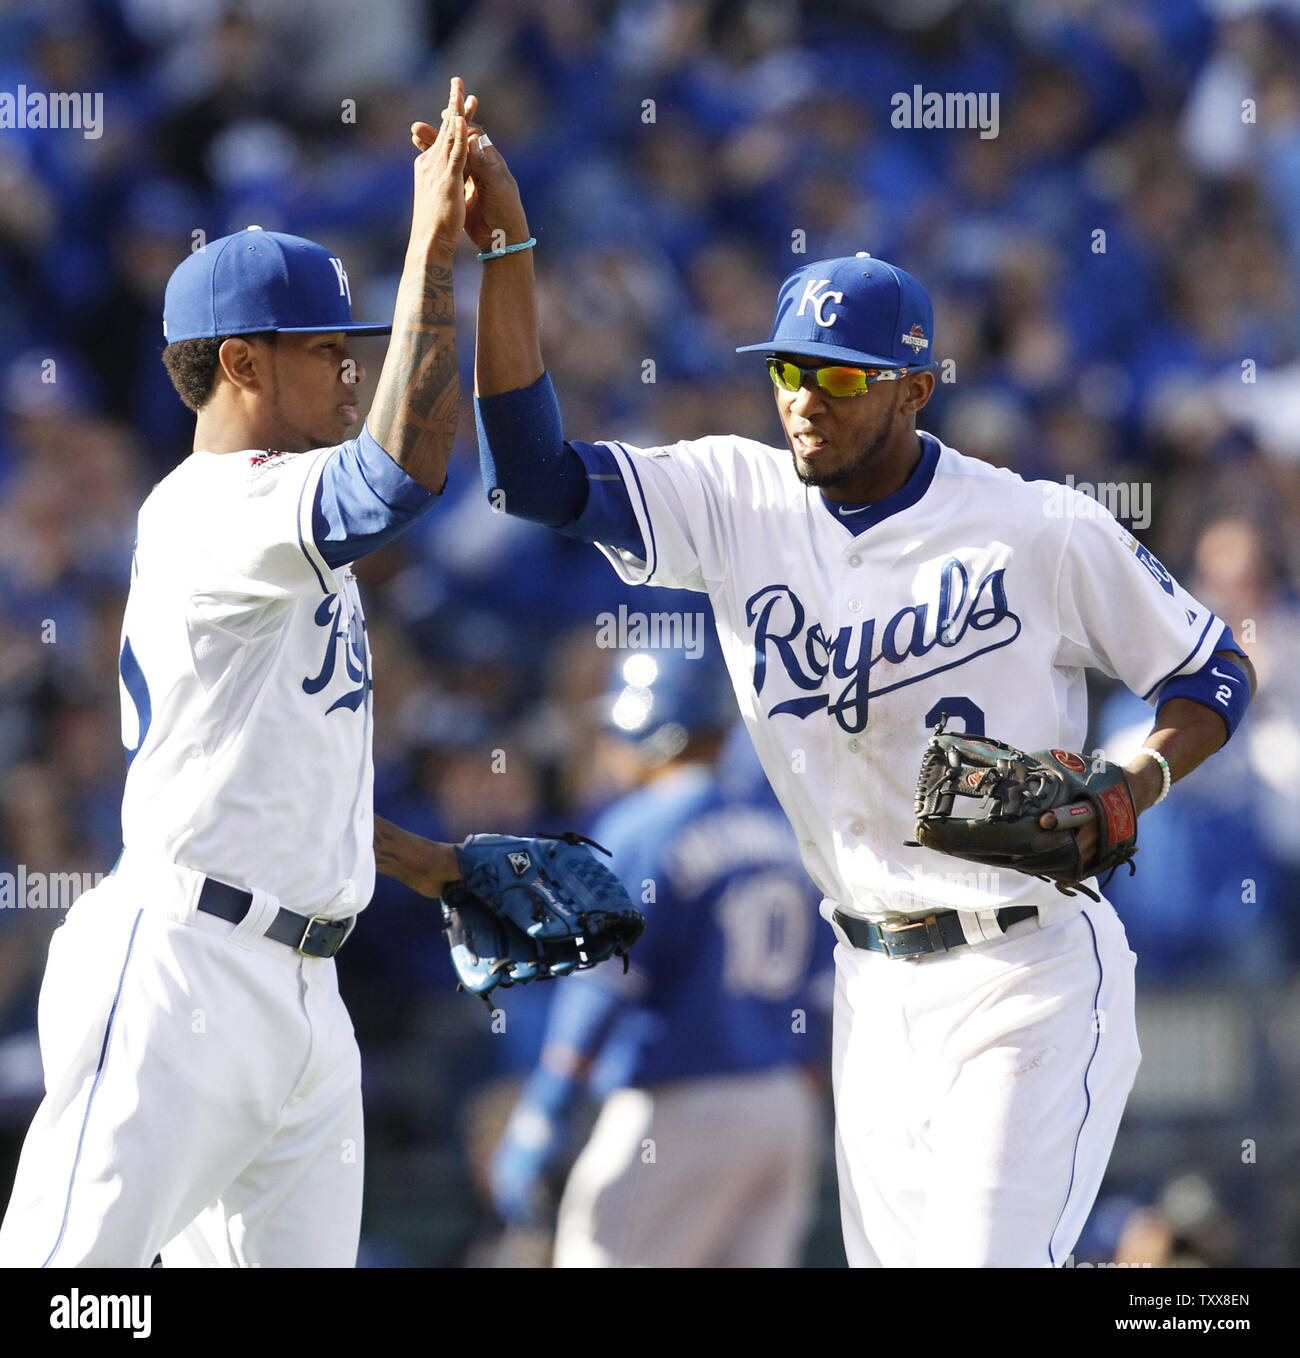 Kansas City Royals Yordano Ventura (L) high fives shortstop Alcides Escobar after a diving catch catch by Escobar of a liner by Toronto Blue Jays Russell Martin lead to a double play in the second inning of game 2 of the American League Championship Series at Kauffman Stadium in Kansas City, Missouri on October 17, 2015.      Photo by Jeff Moffett/UPI Stock Photo